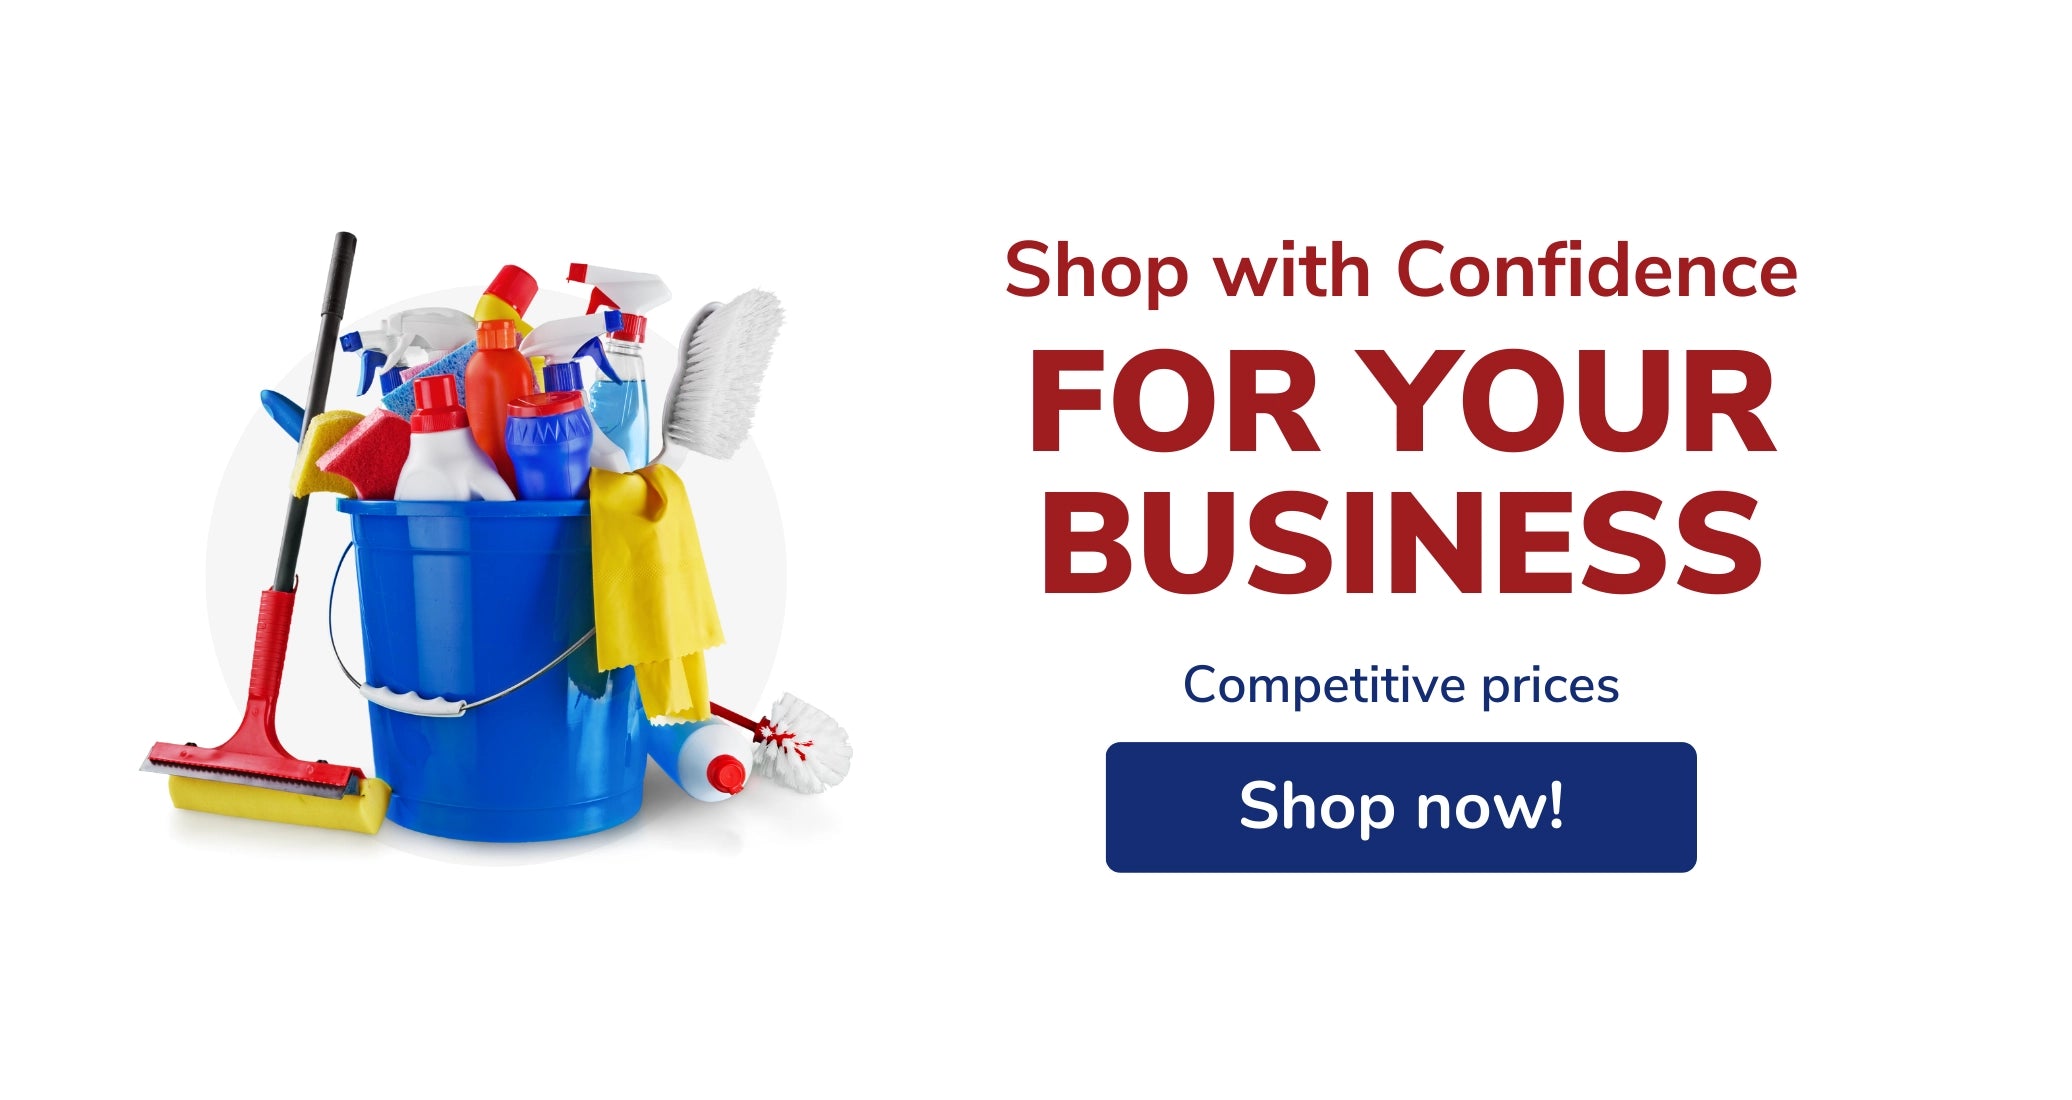 All businesses can shop with confidence with Continental Global Services Competitive Prices